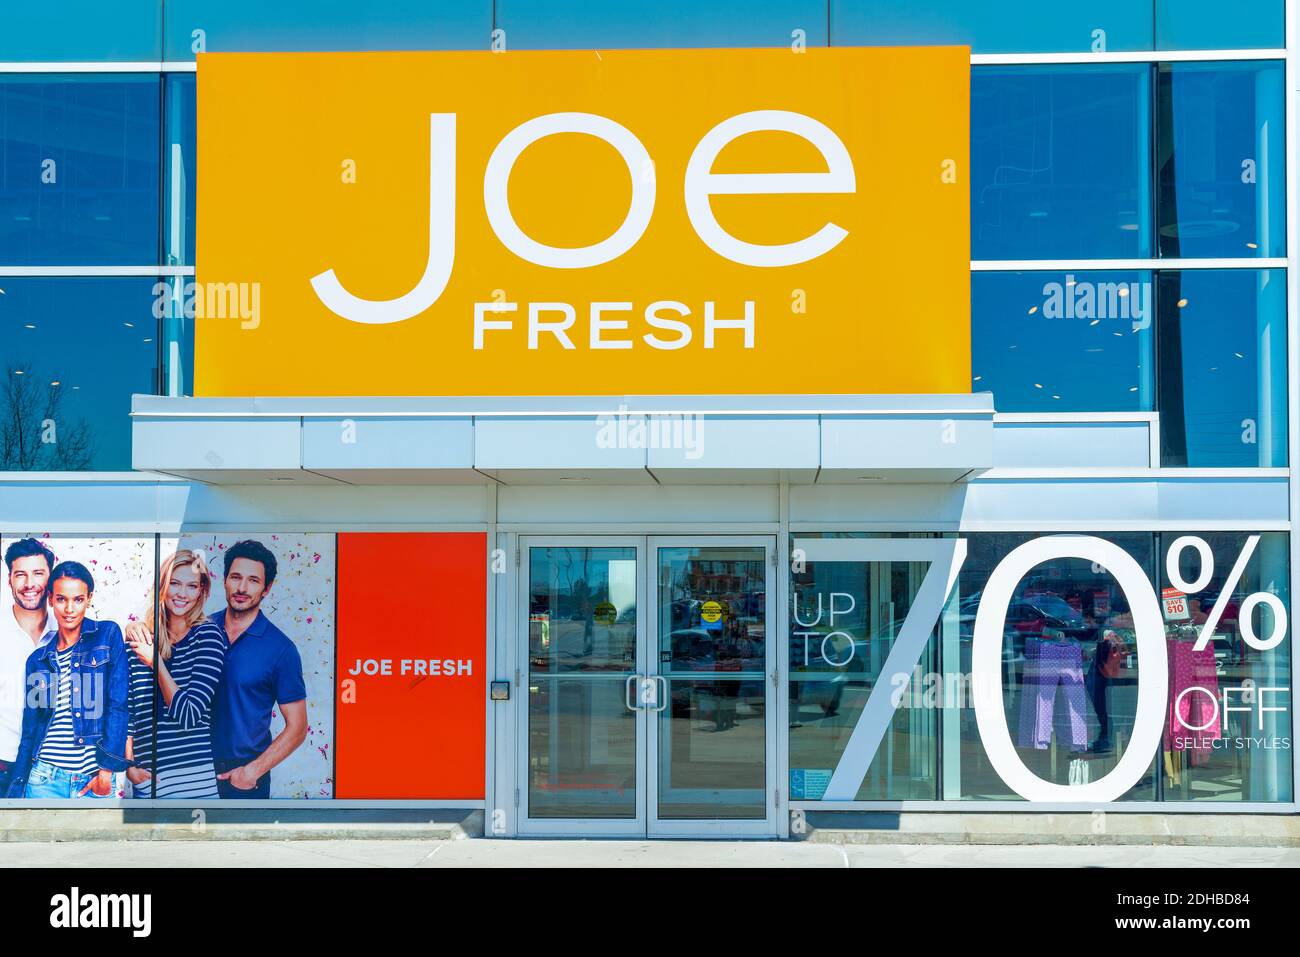 https://c8.alamy.com/comp/2DHBD84/joe-fresh-store-entrance-joe-fresh-is-a-fashion-brand-and-retail-chain-know-for-selling-high-quality-clothing-shoes-and-purses-2DHBD84.jpg